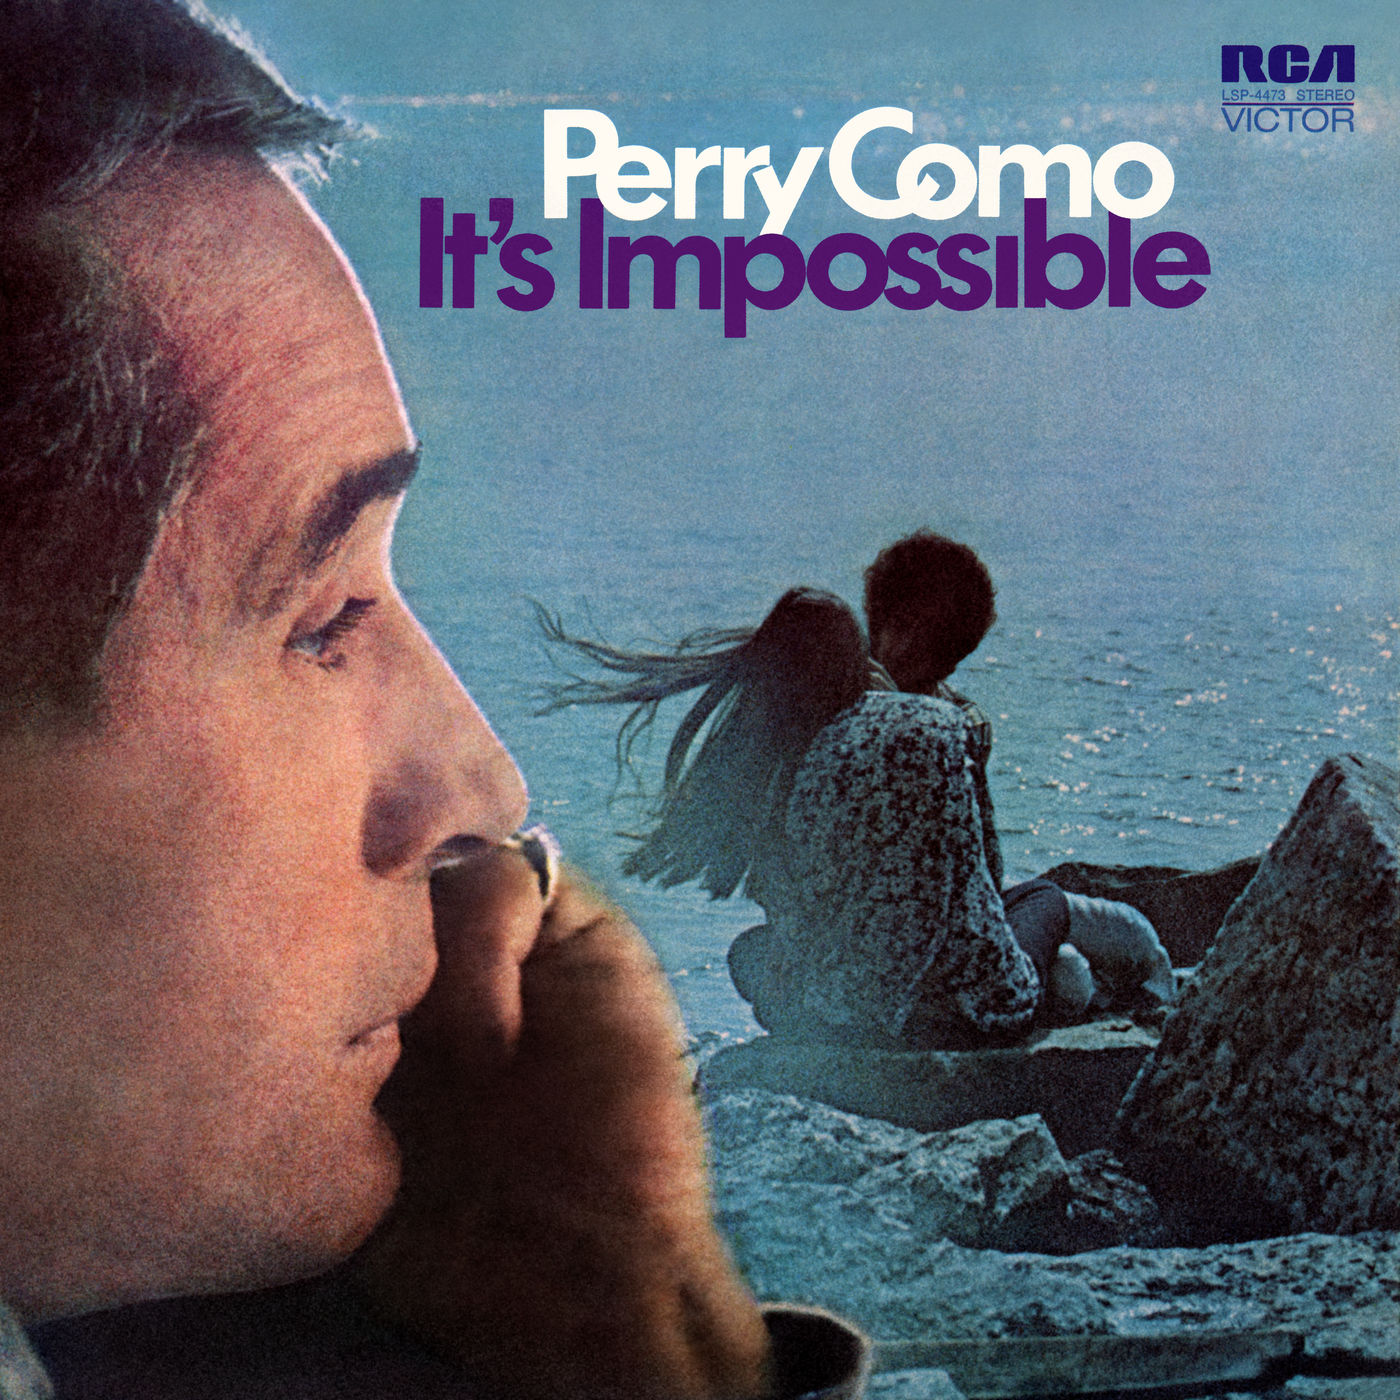 Perry Como - It’s Impossible (1970) [FLAC 24bit/192kHz]